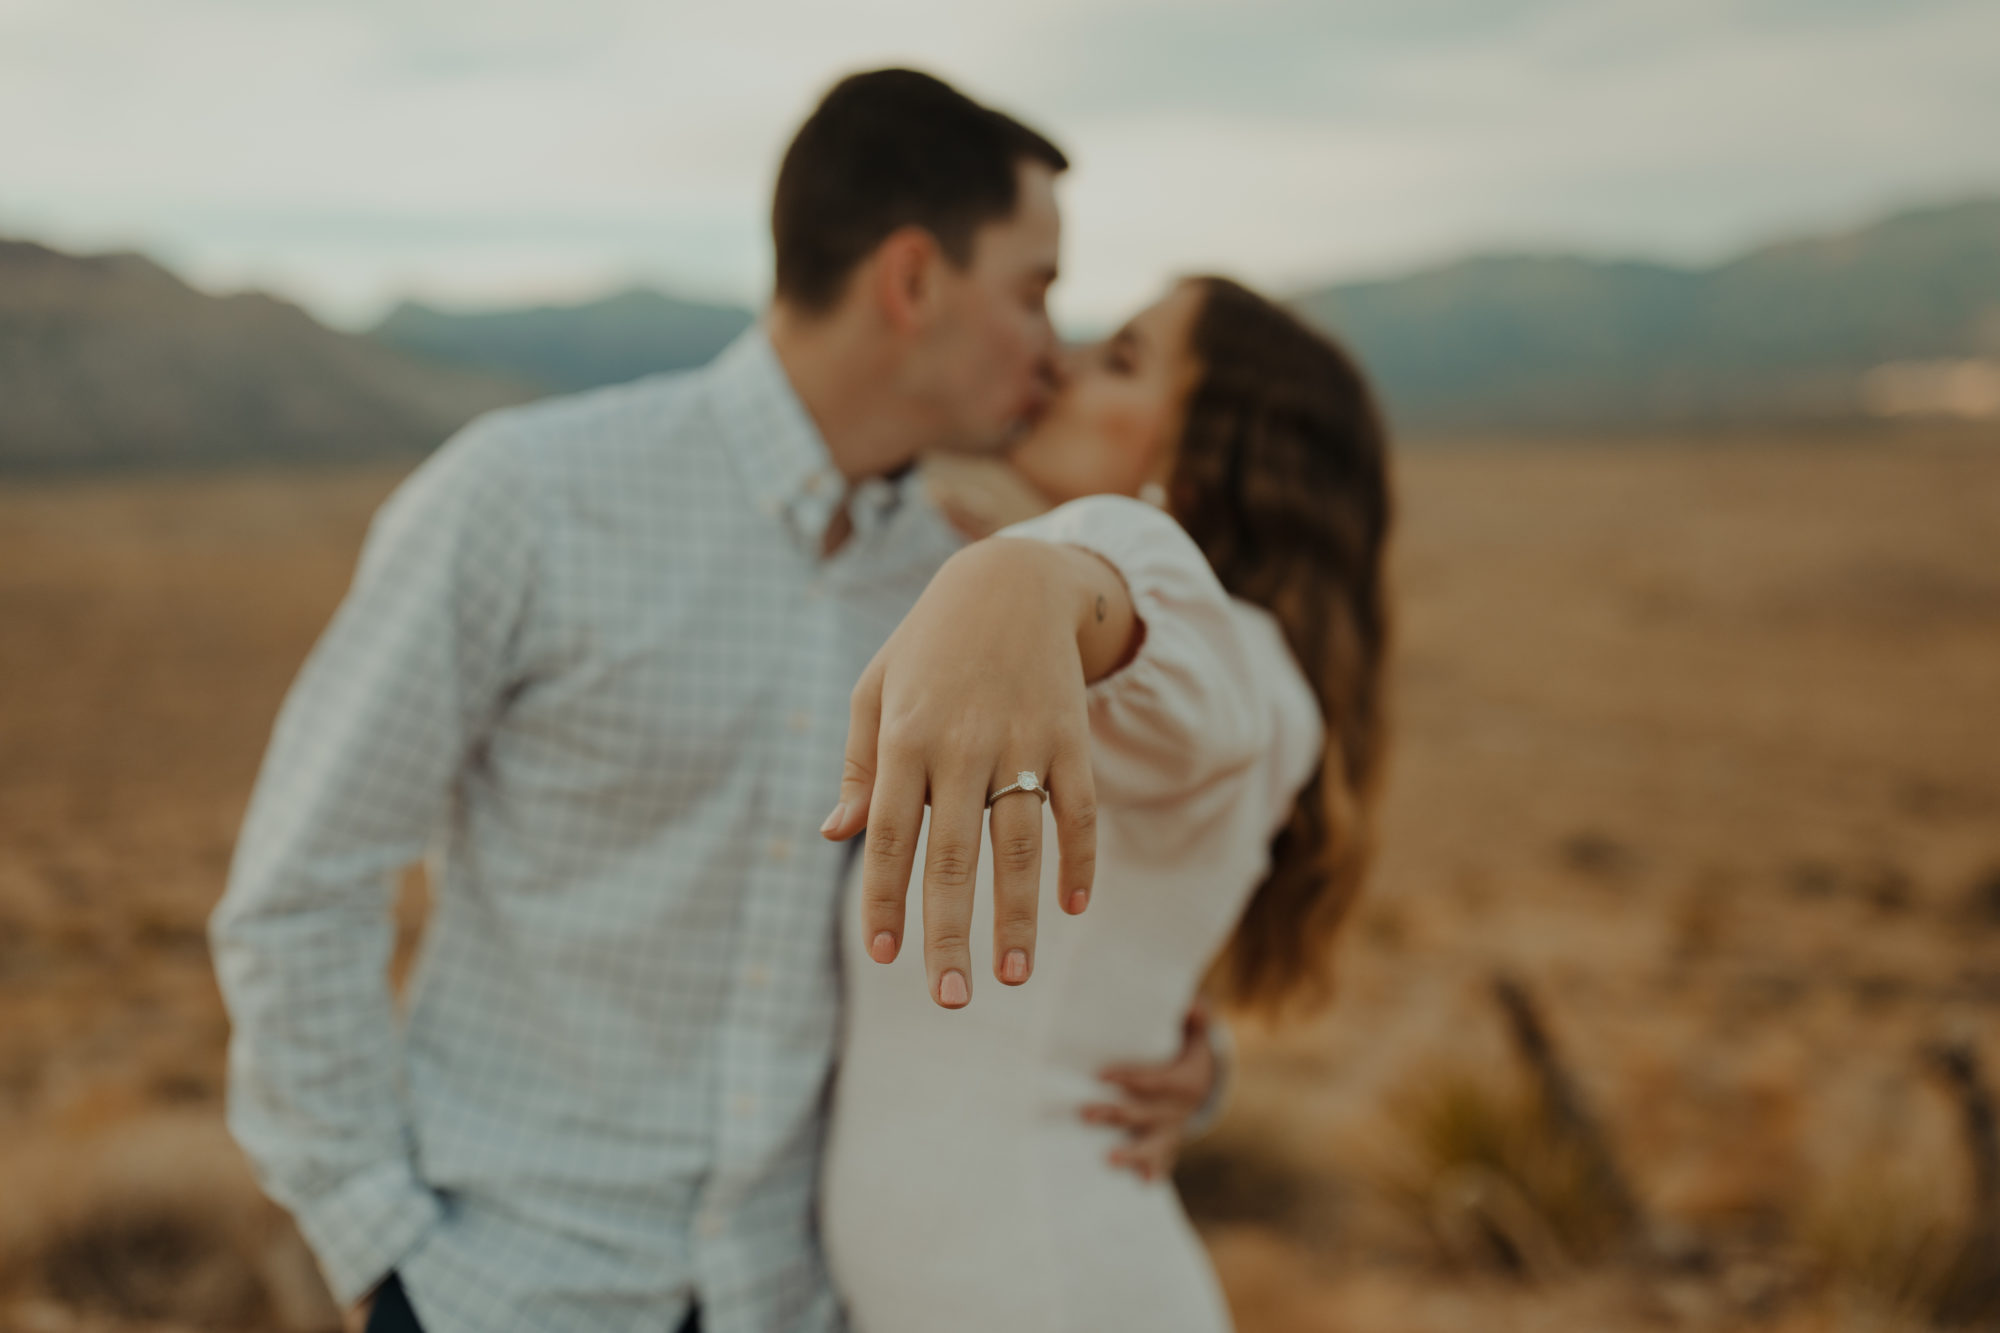 upclose of engagement ring and couple kissing blurred in the background in the desert